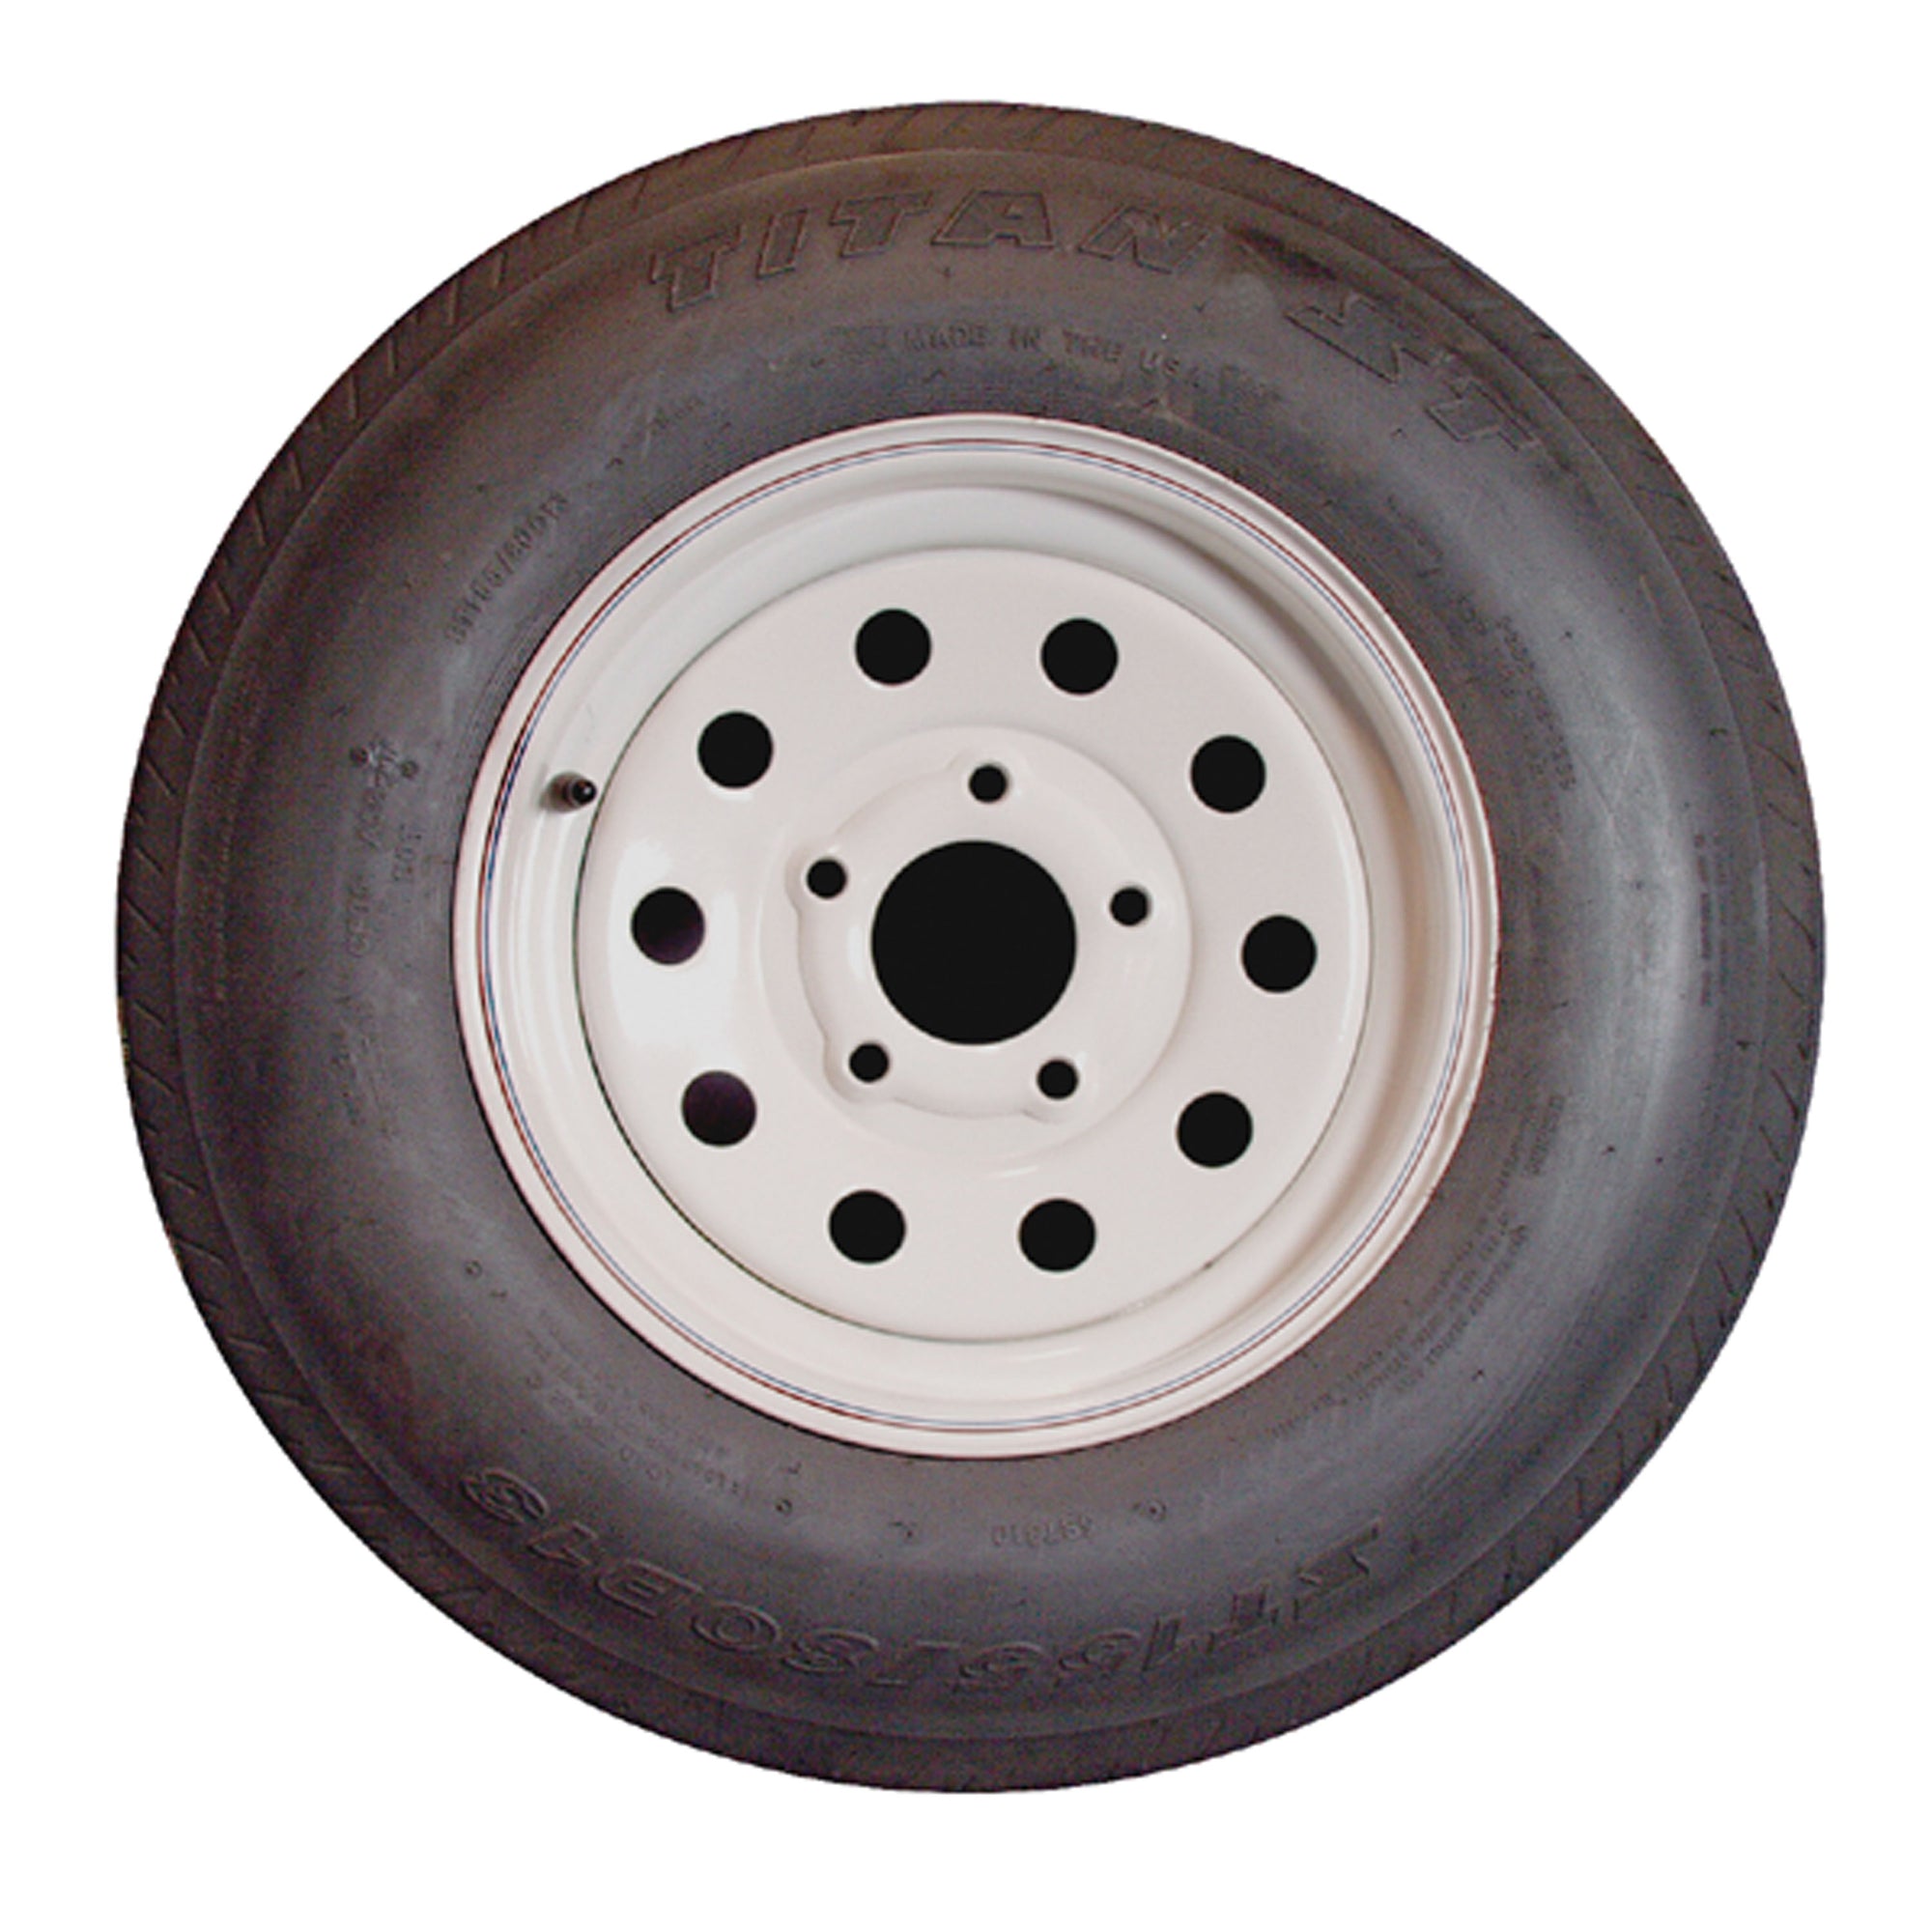 Americana Tire and Wheel 3S338 Economy Bias Tire and Wheel ST185/80D13 D/5-Hole - Painted Silver Modular Rim